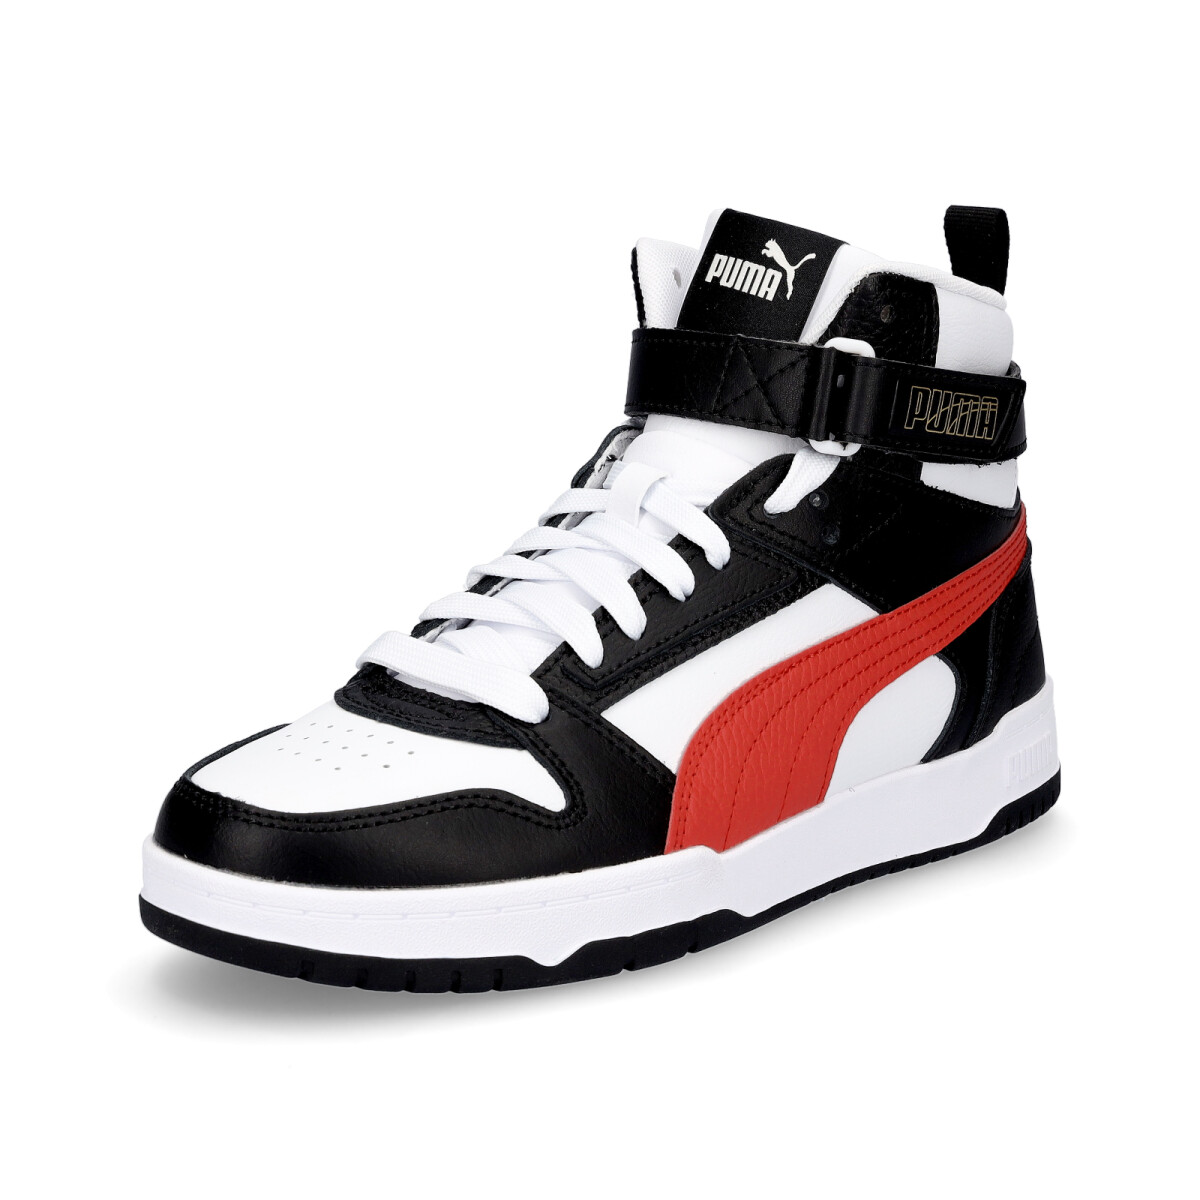 Buy Puma Unisex-Adult Shuffle Mid White-High Risk Red-Peacoat Team Gold  Sneaker-8 UK (38074803) at Amazon.in